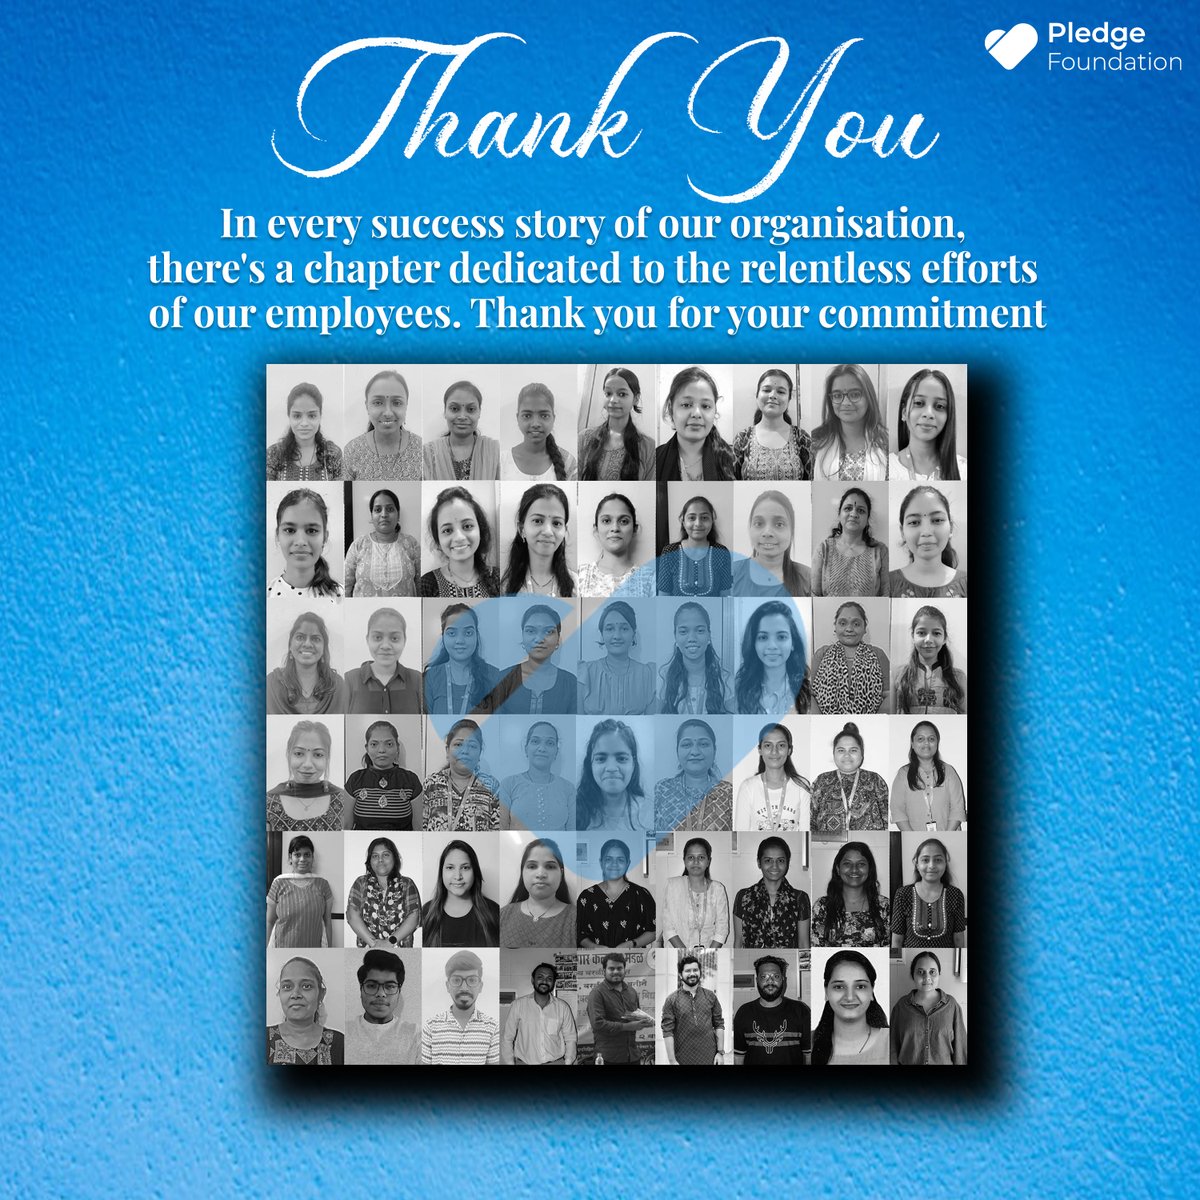 We're honored to receive the Great Place to Work certificate. Today, our spotlight shines on our remarkable team – the true heroes! Your dedication & passion drive our success. Thank you for excellence.🌟#TeamAppreciation #GratitudeInAction #DreamTeamPower #honored #pledgefamily